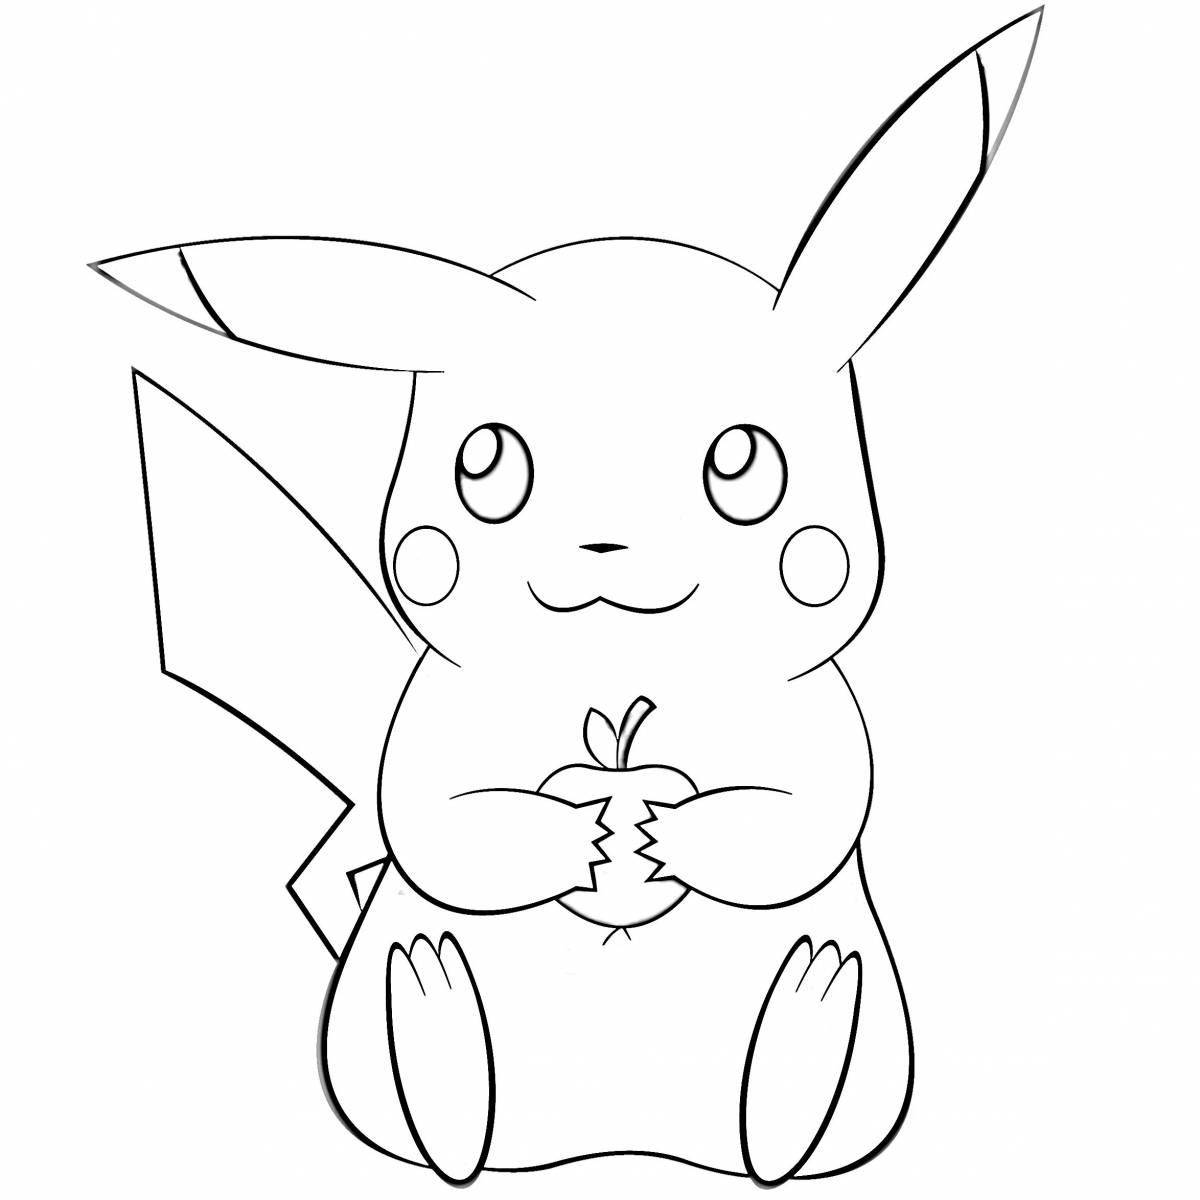 Radiant coloring page antistress pikachu